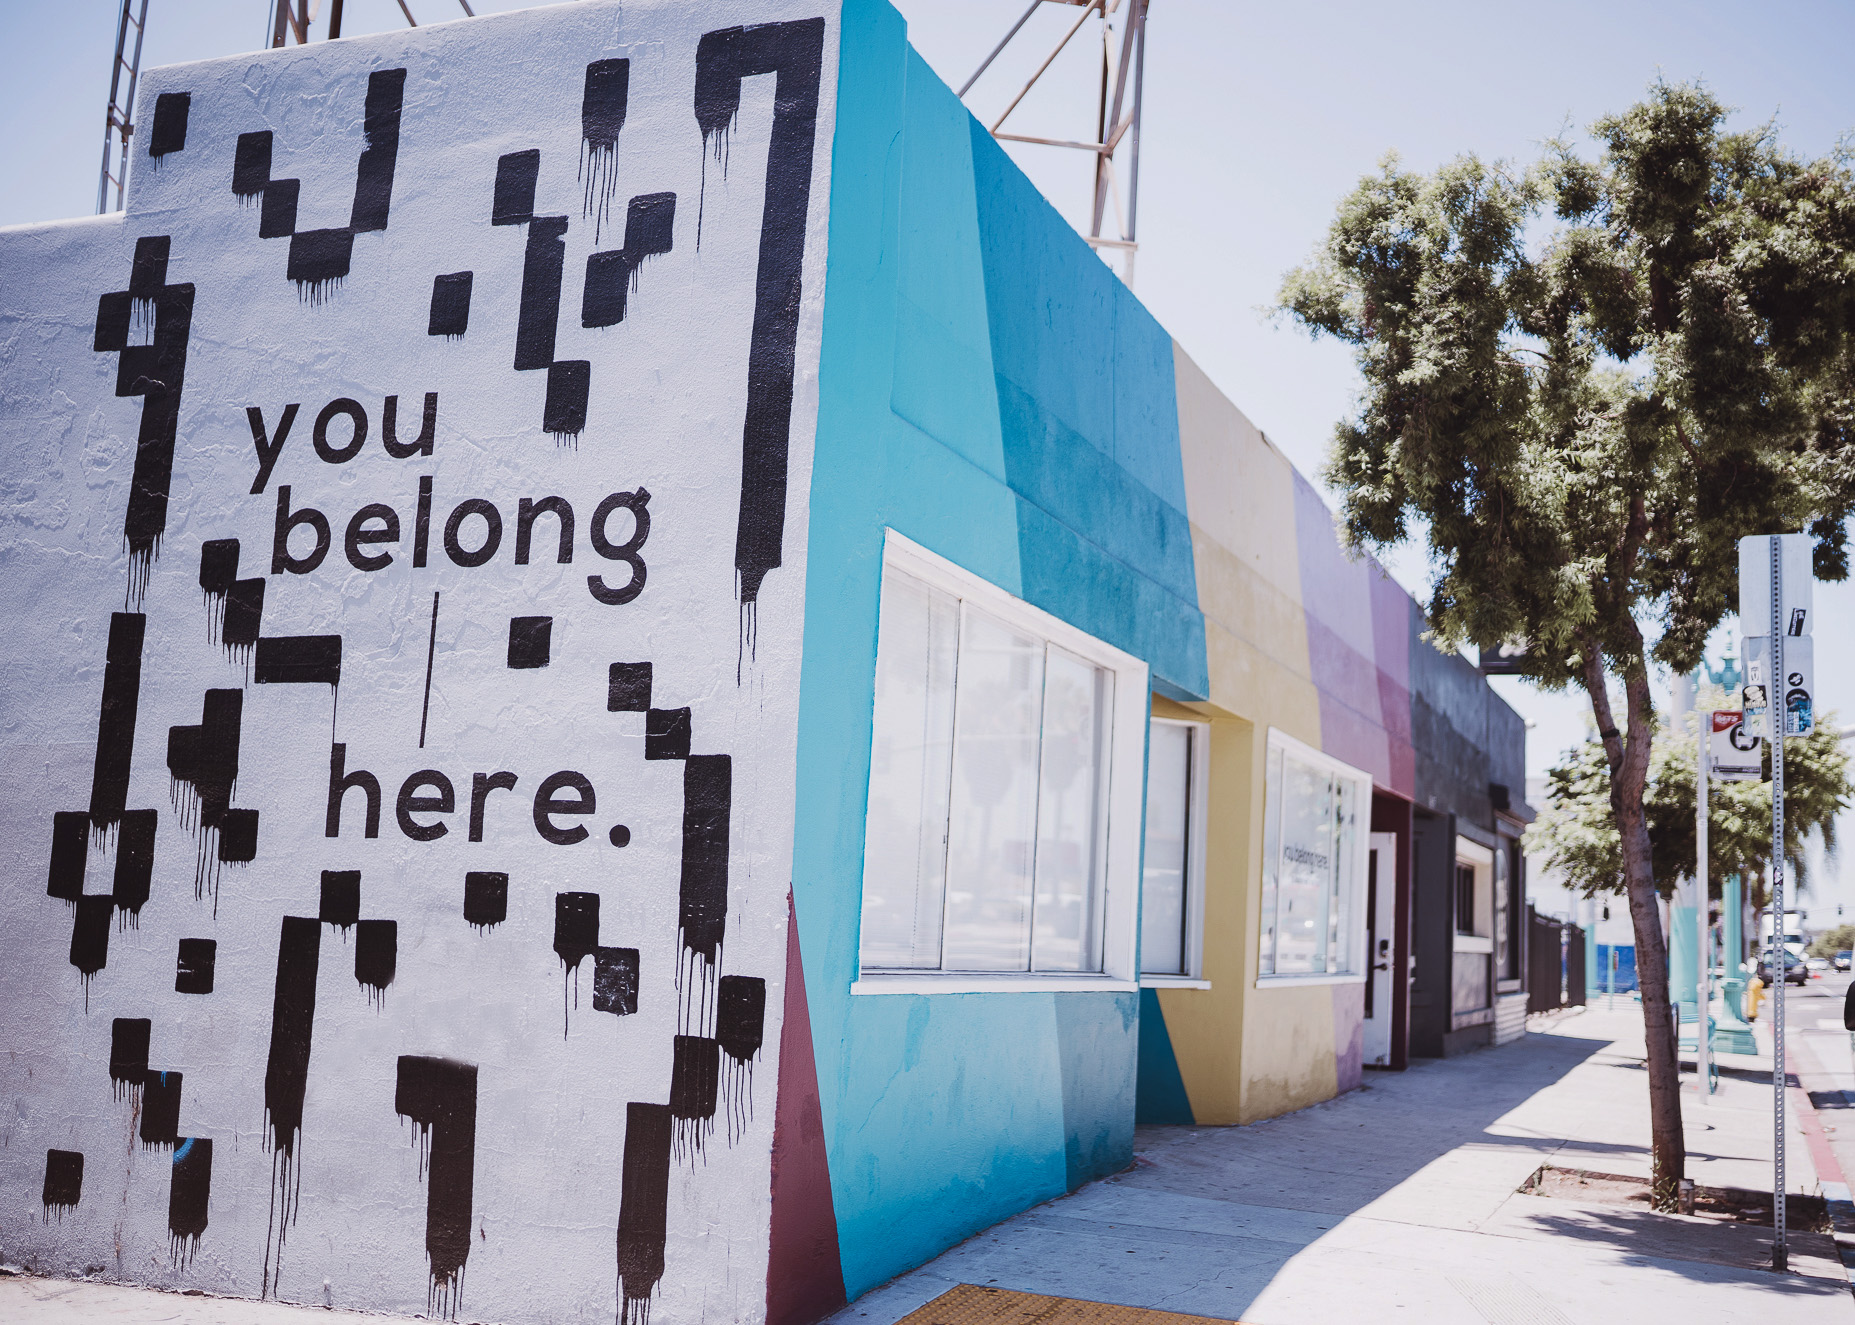 You Belong Here Incubator space for creatives and business support storefront and side, painted with colorful murals